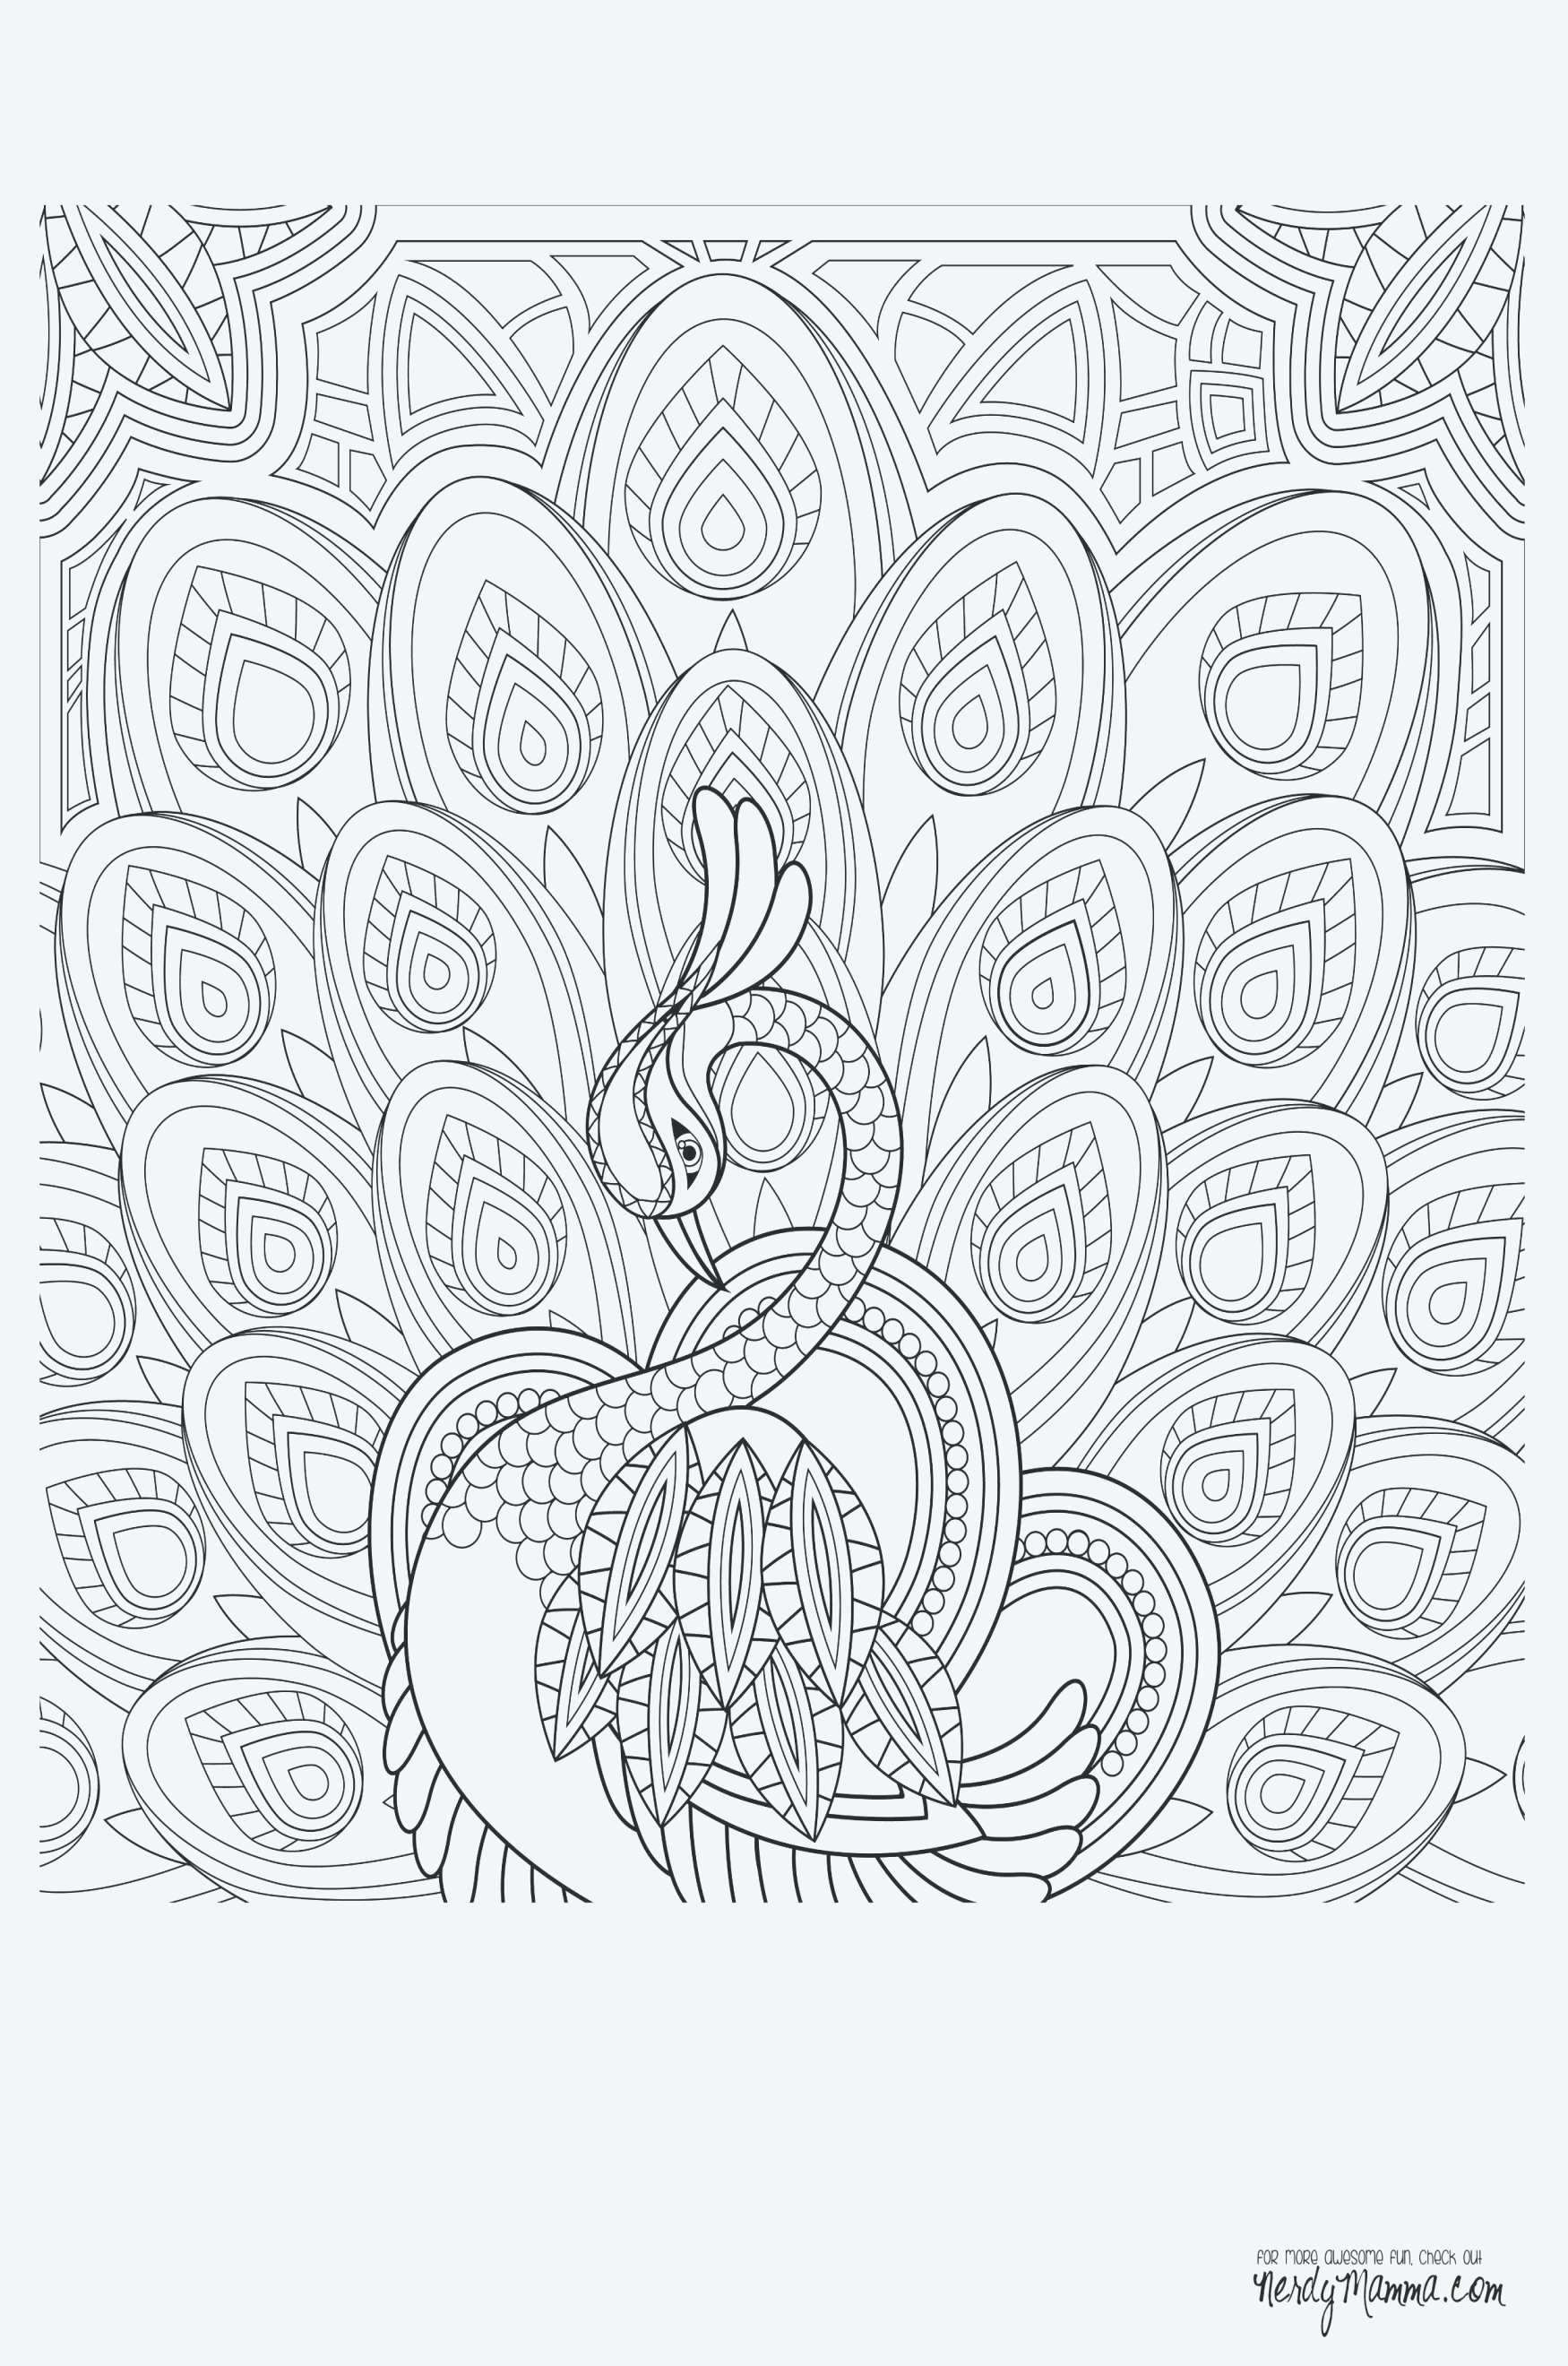 Free Coloring Pages Hearts Free Coloring Pages Hearts Redhatsheetco